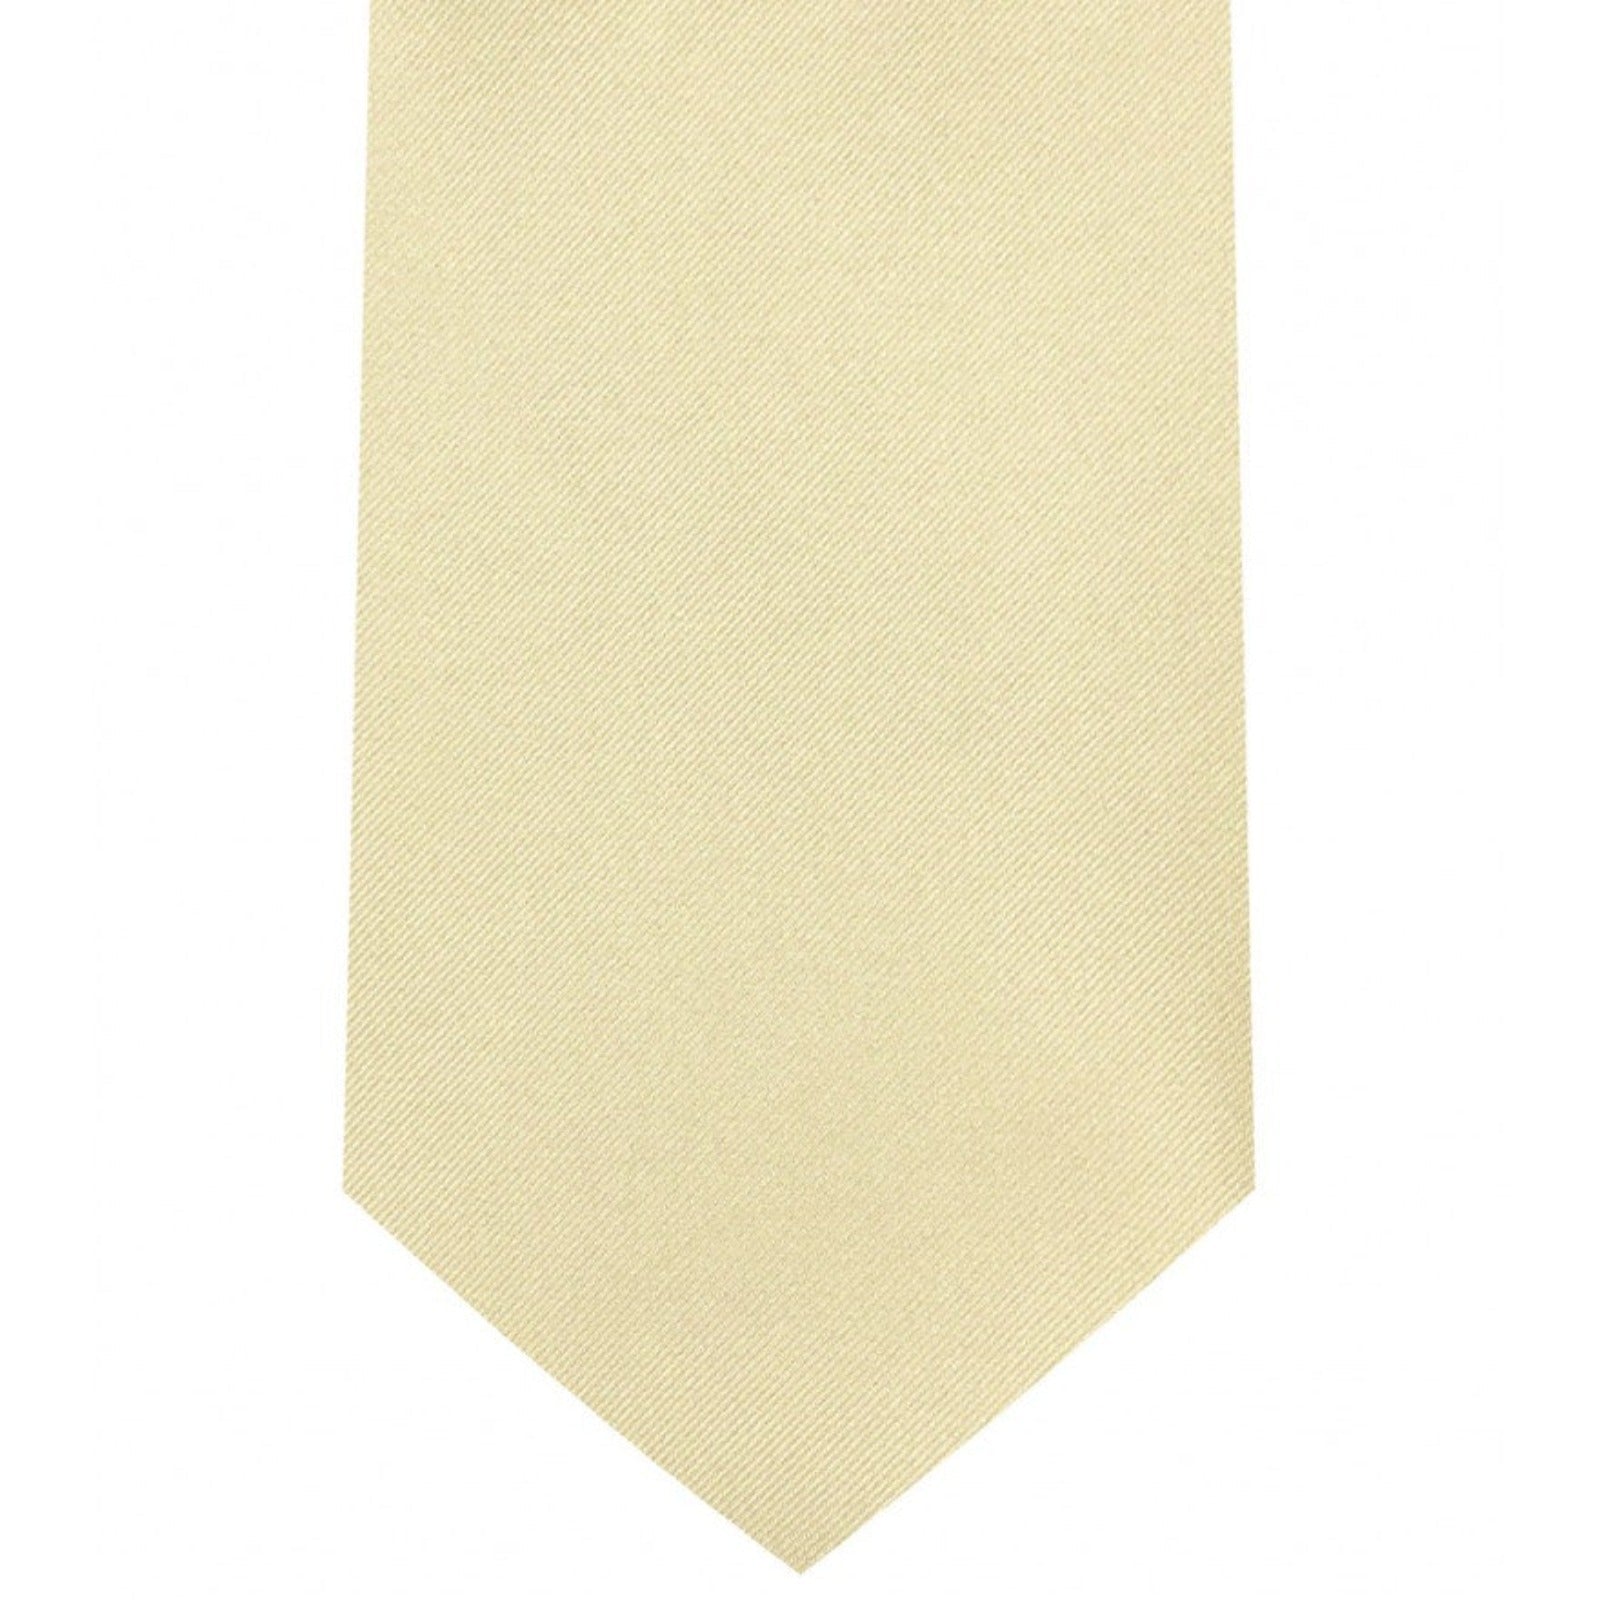 Classic Champagne Tie Regular width 3.5 inches With Matching Pocket Square | KCT Menswear 